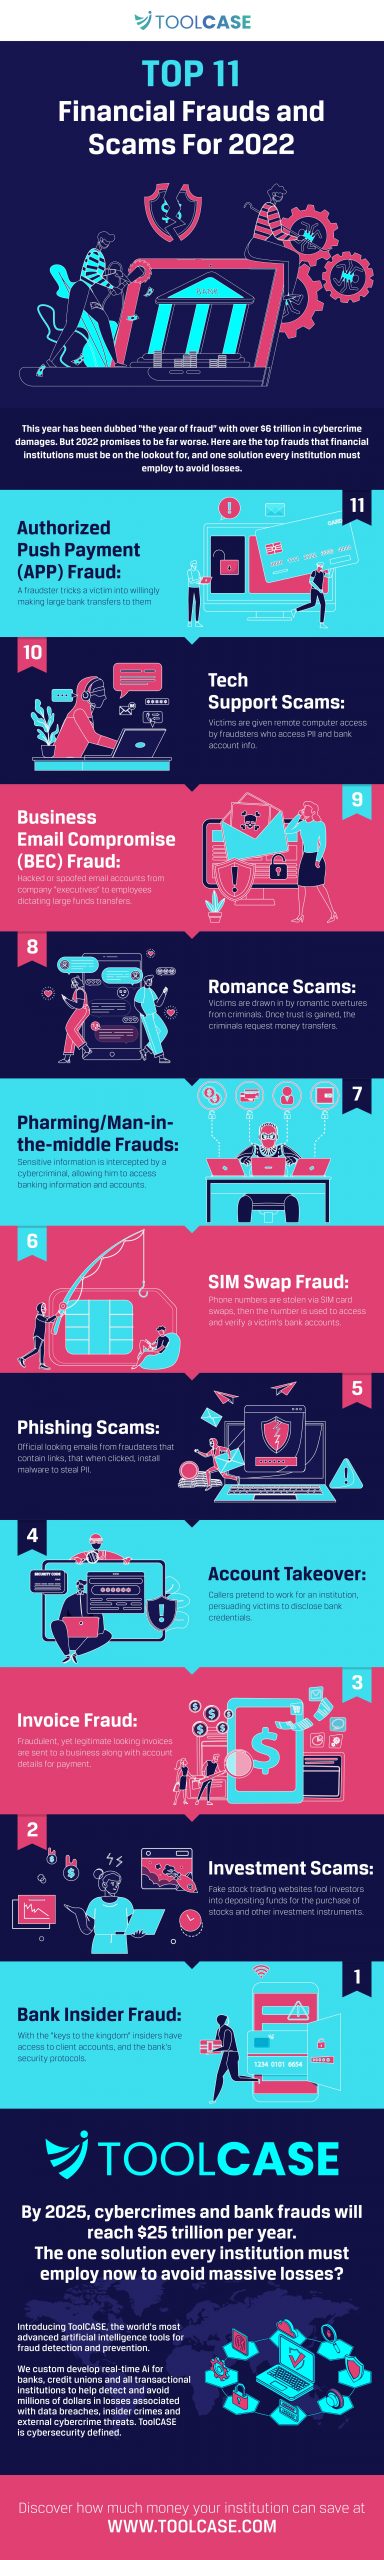 Top 11 Financial Frauds and Scams For 2022